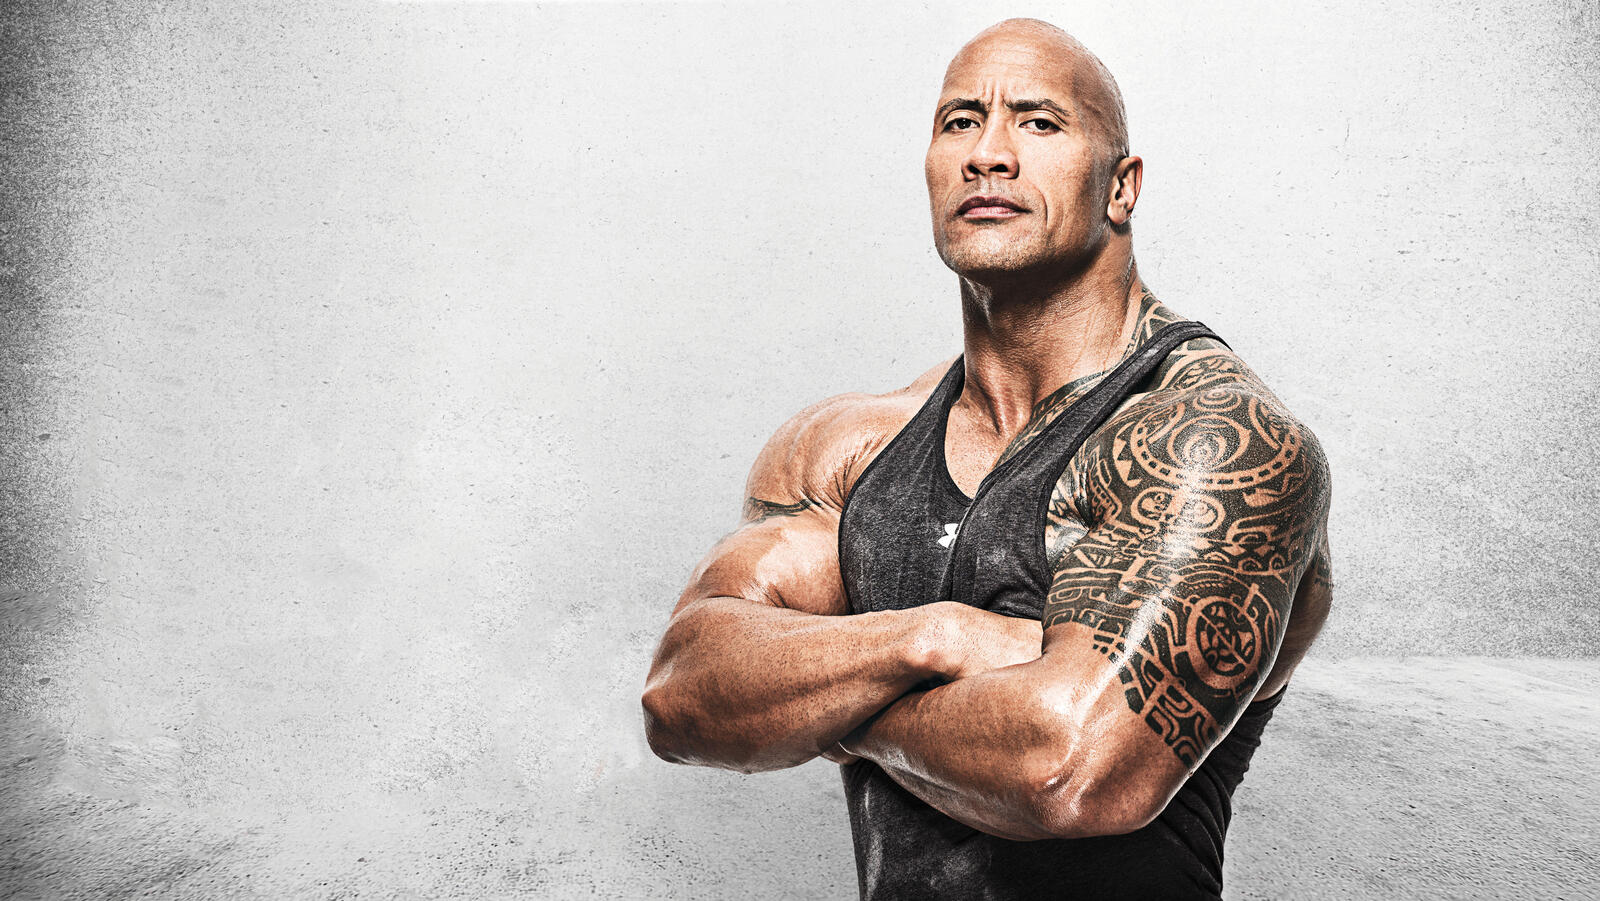 Free photo Dwayne Johnson is widely known as the rock